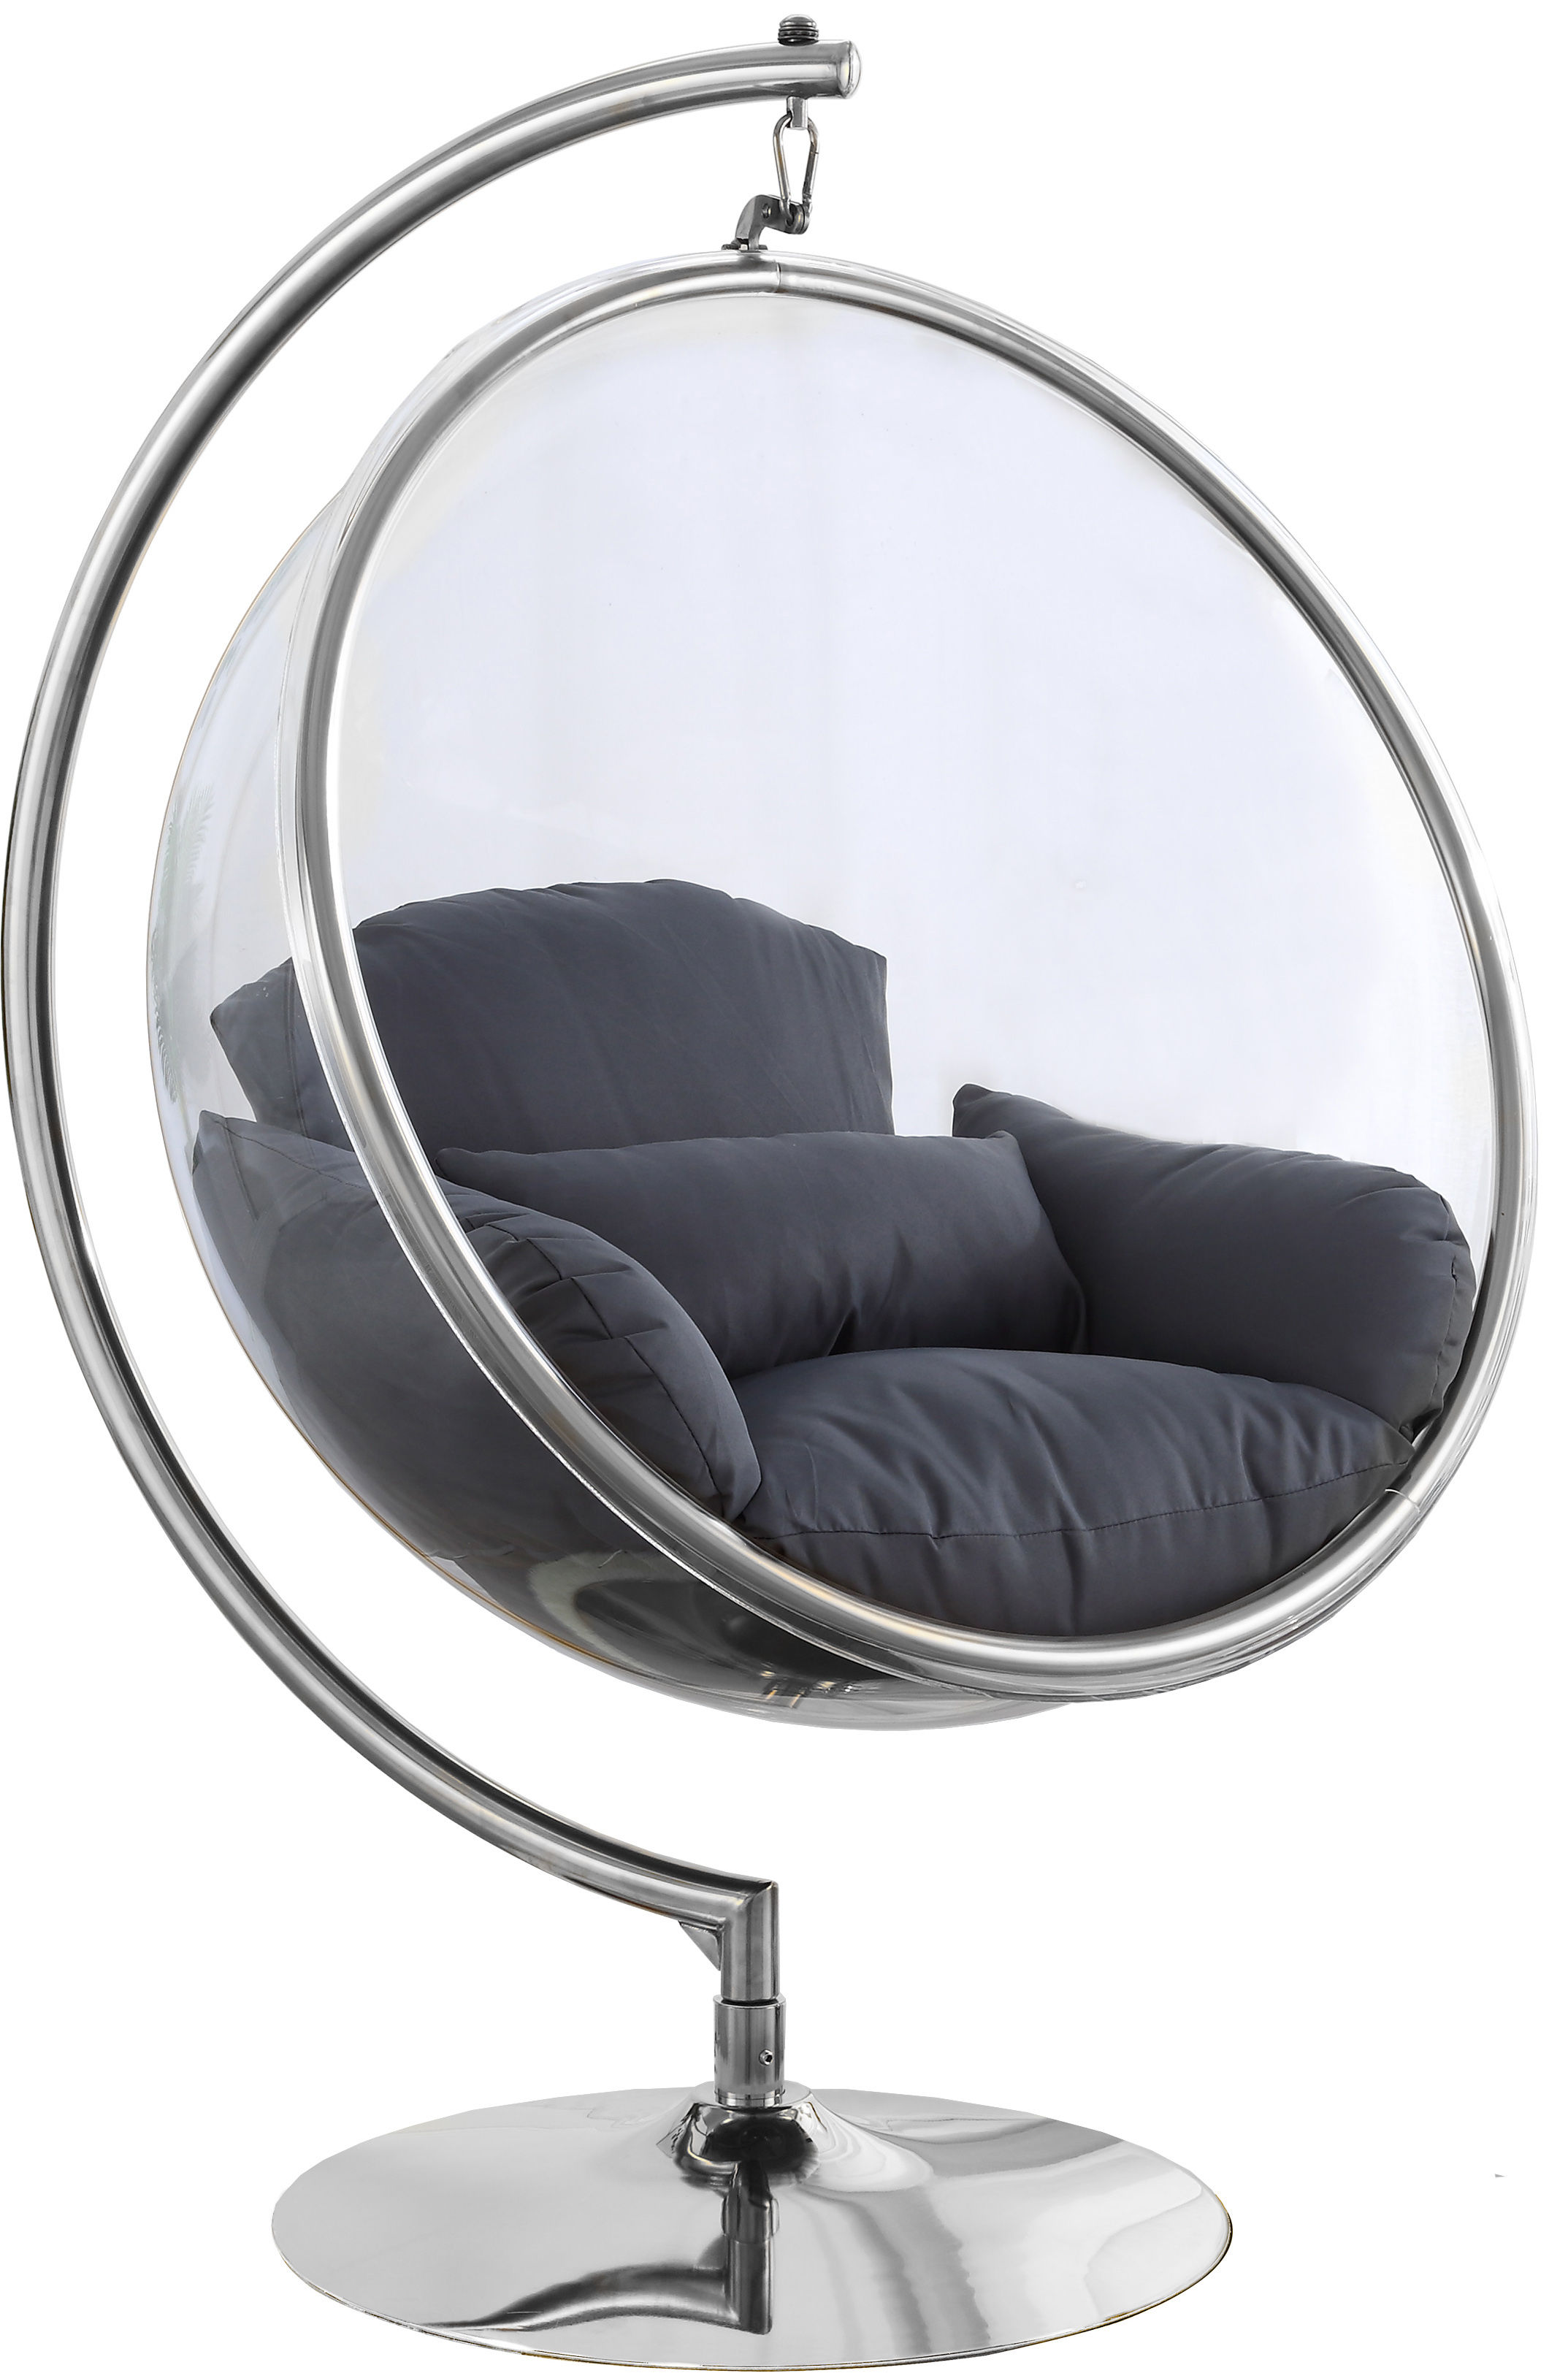 Meridian Furniture Luna Grey Fabric Chrome Base Acrylic Swing Bubble Accent Chair